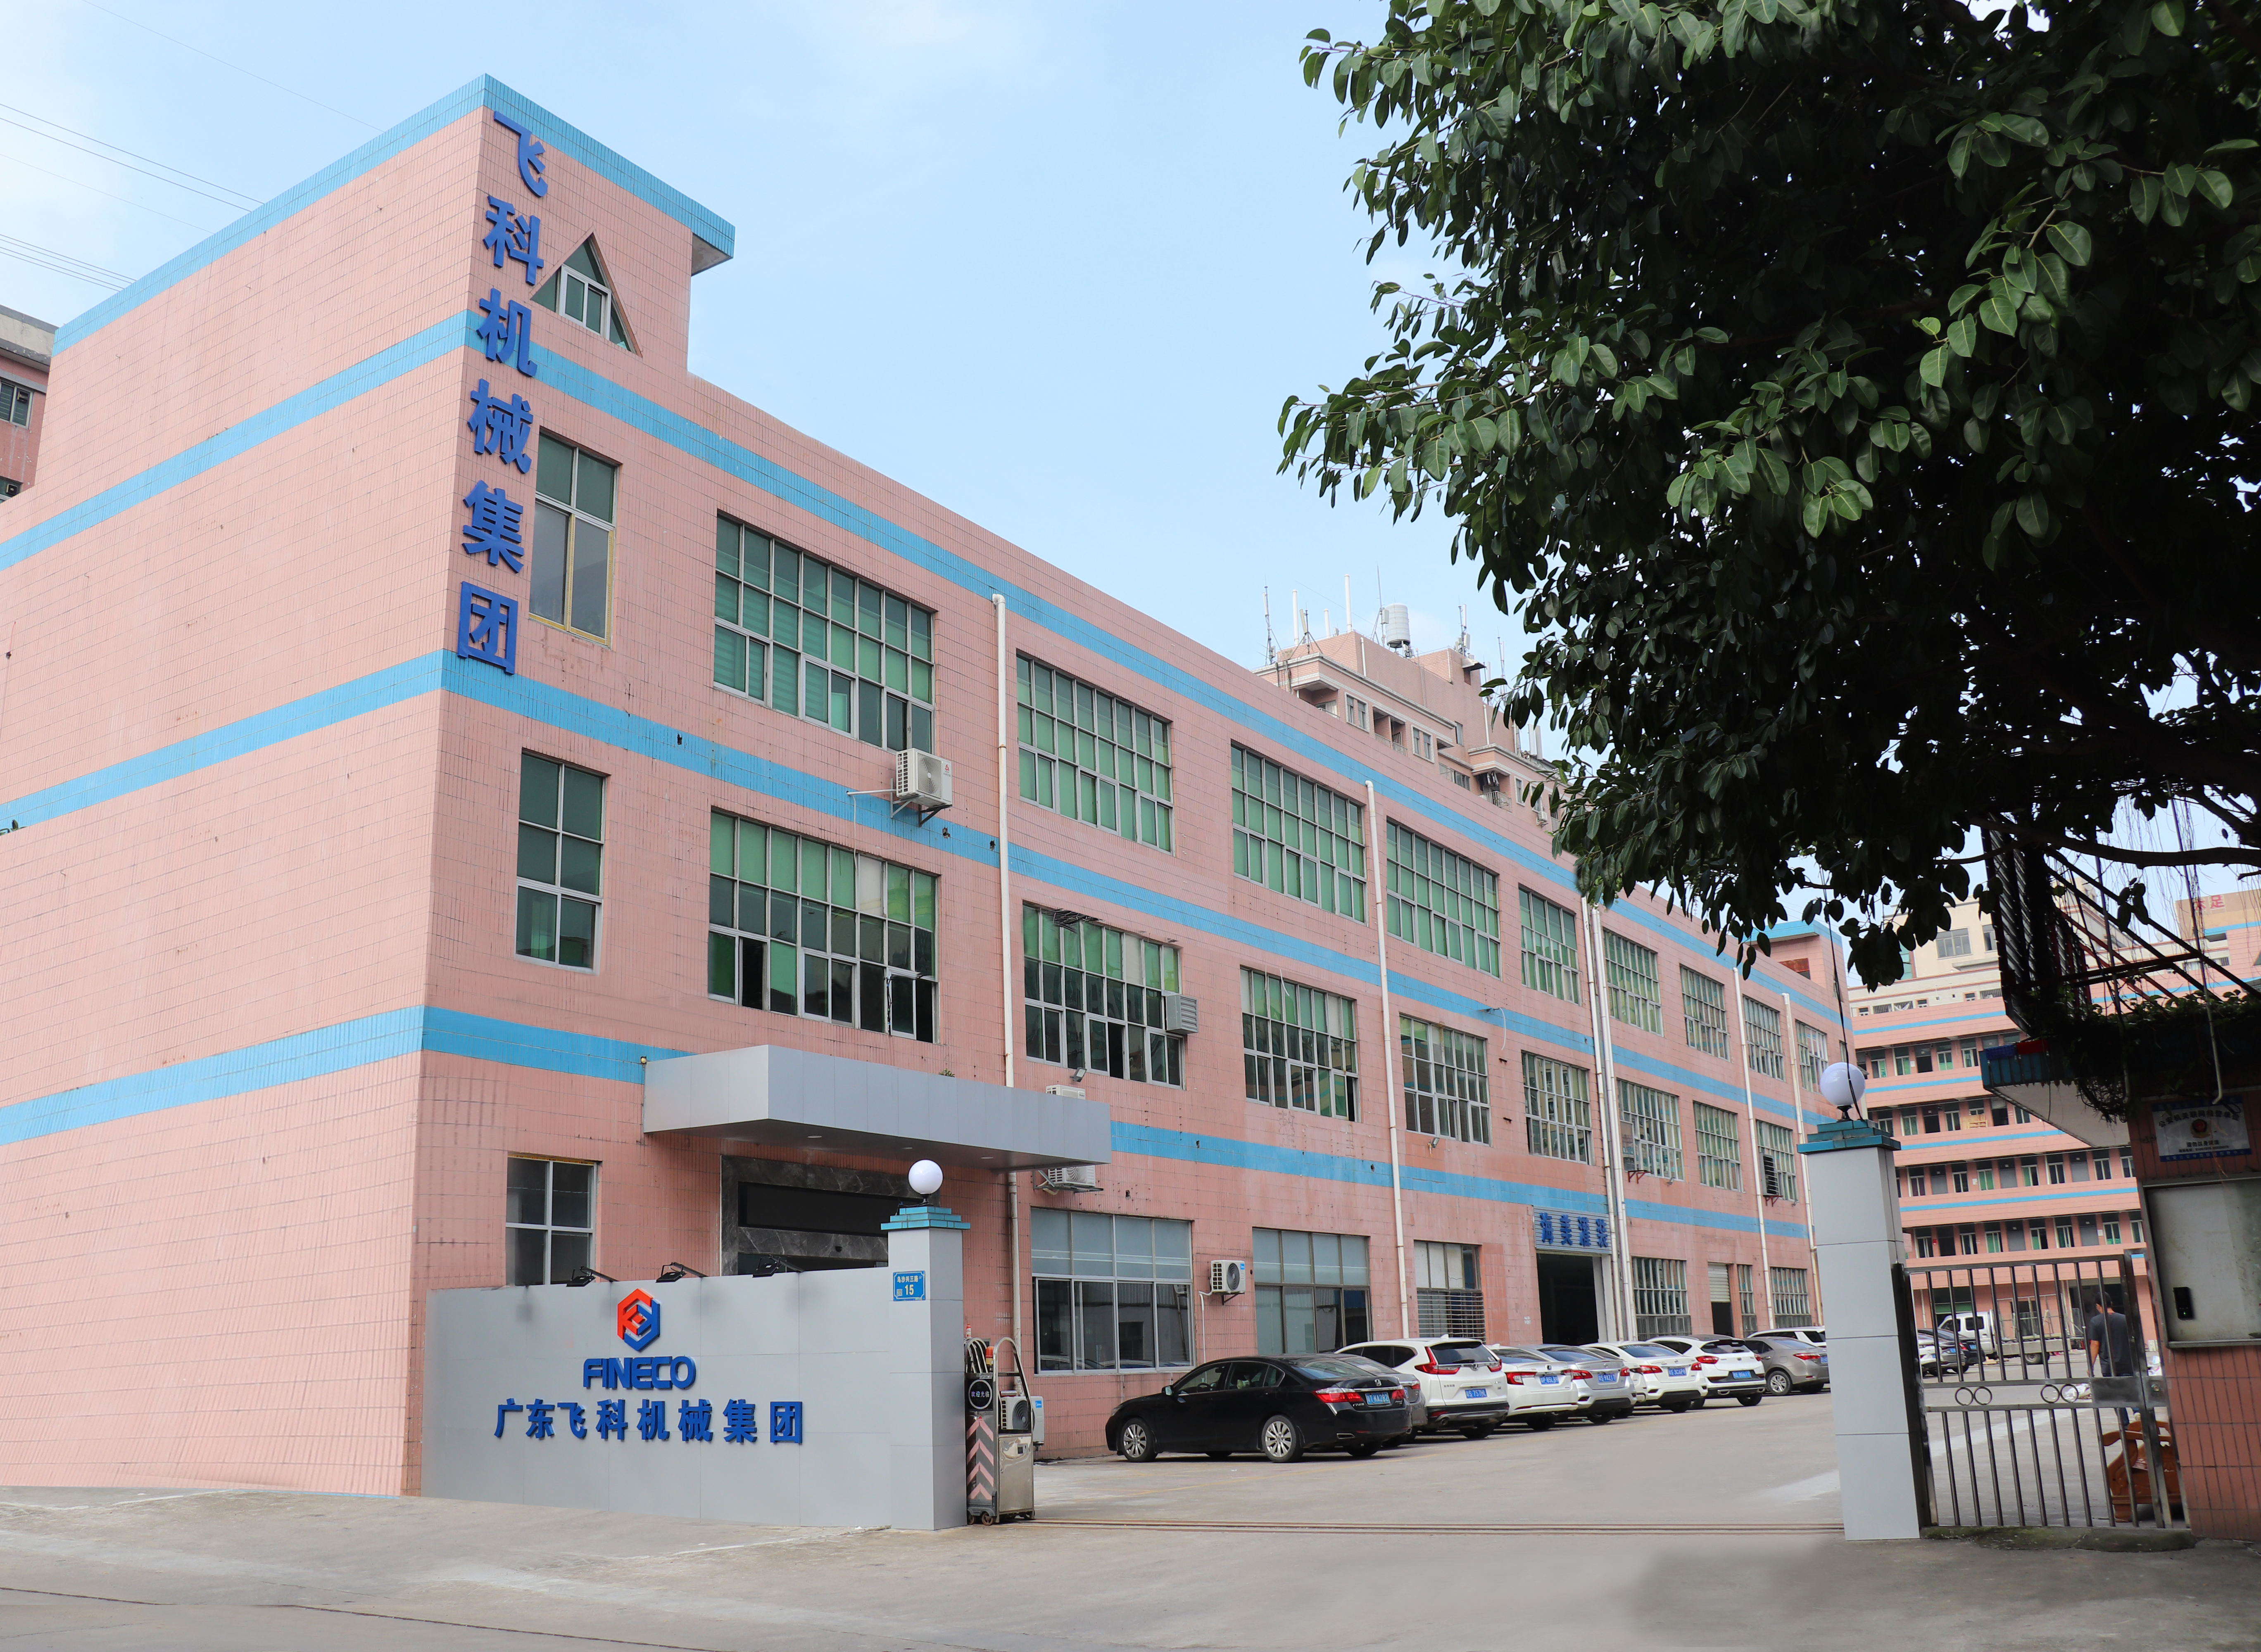 Guangdong Fineco Machinery Group moved to a new location